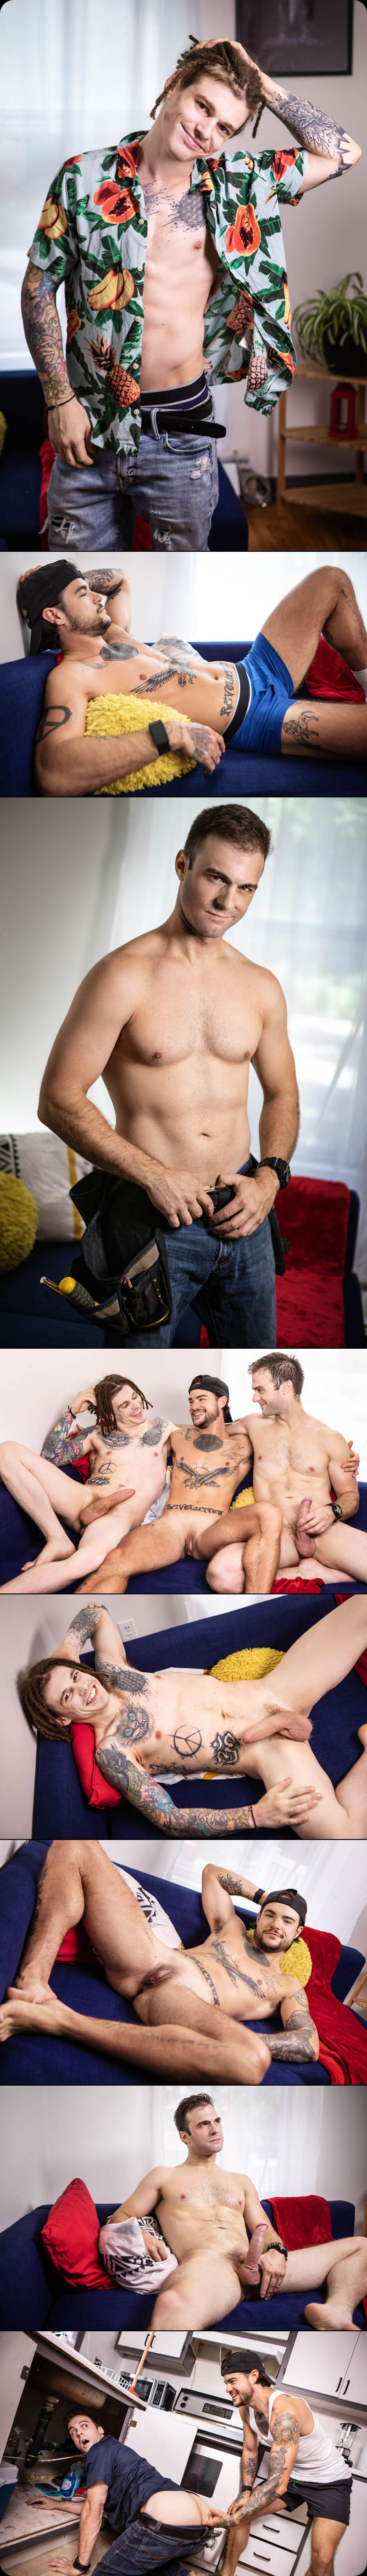 Double-Dip That Dick (FTM Porn Star Tommy Tanner Tag-Teamed By Gabriel Clark and Sunny D) at MEN.com